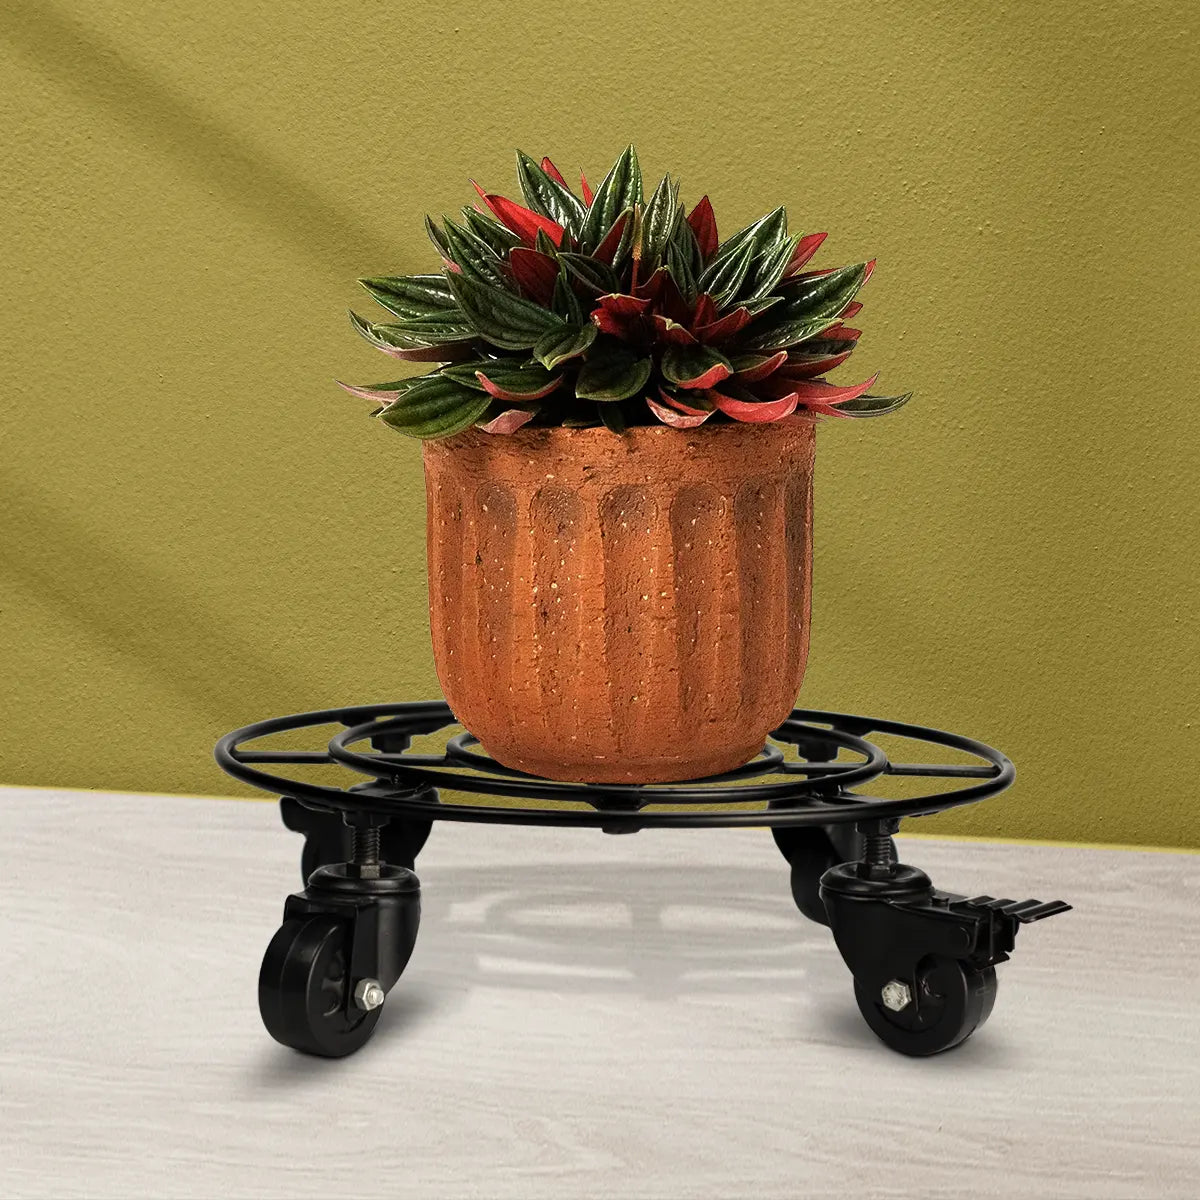 Metal Plant Caddy Iron Plant Stand with Lockable Wheels Gardening Tools Urban Plant 